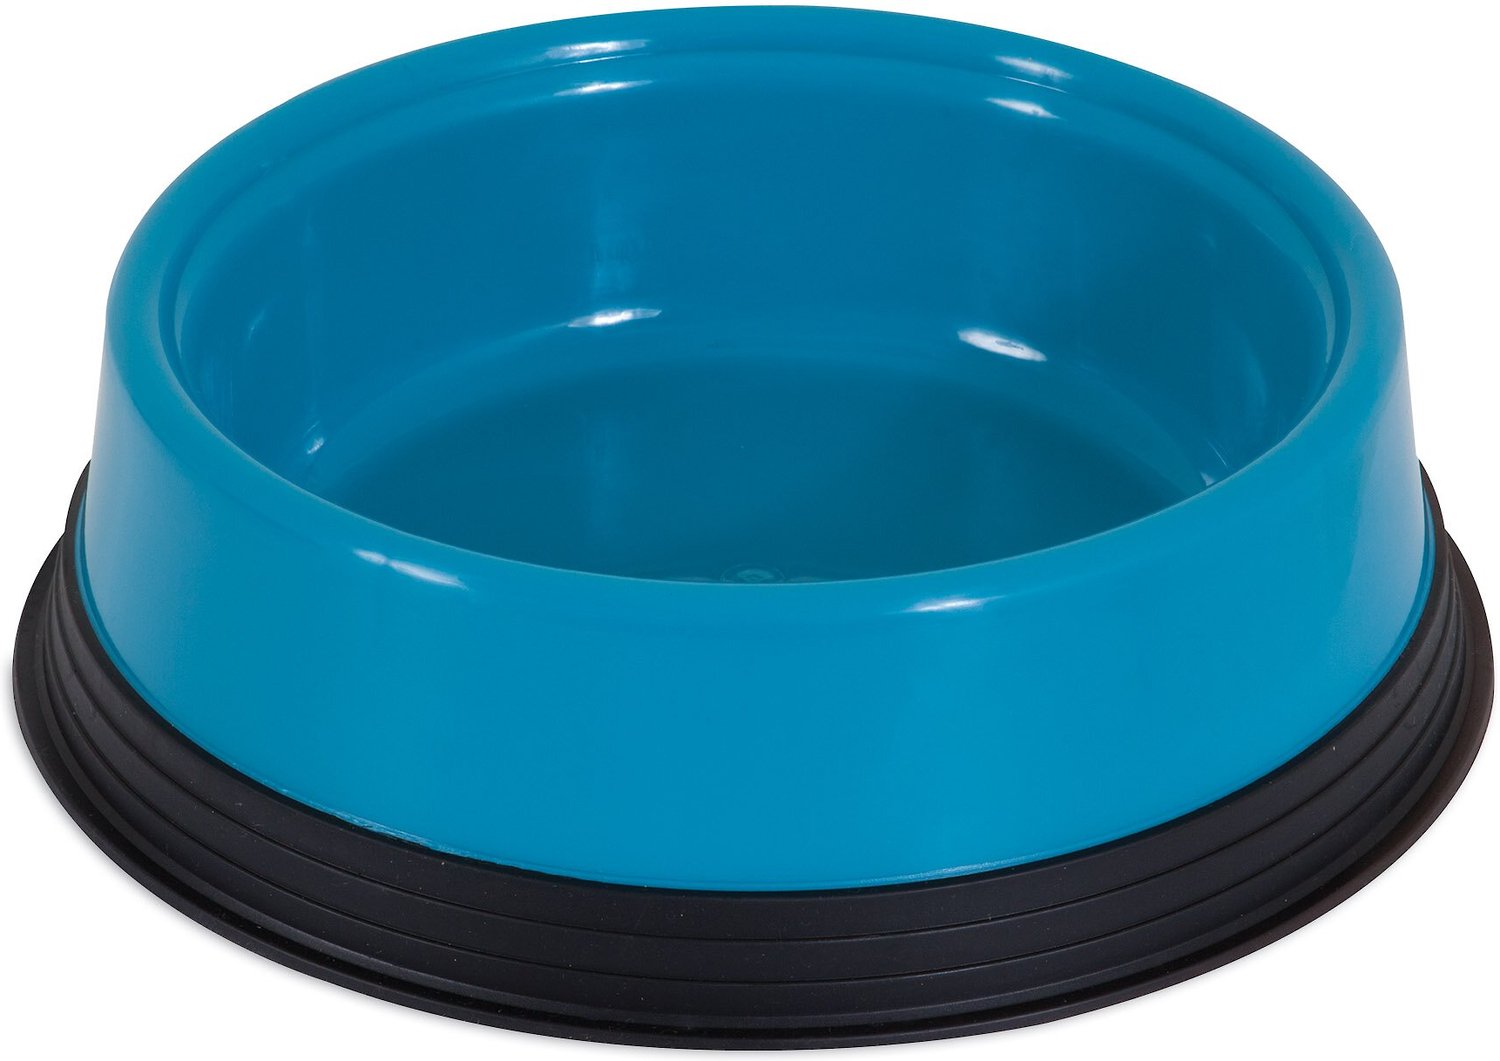 JW PET Skid Stop Basic Non-Skid Plastic Dog Bowl, 10-cup - Chewy.com